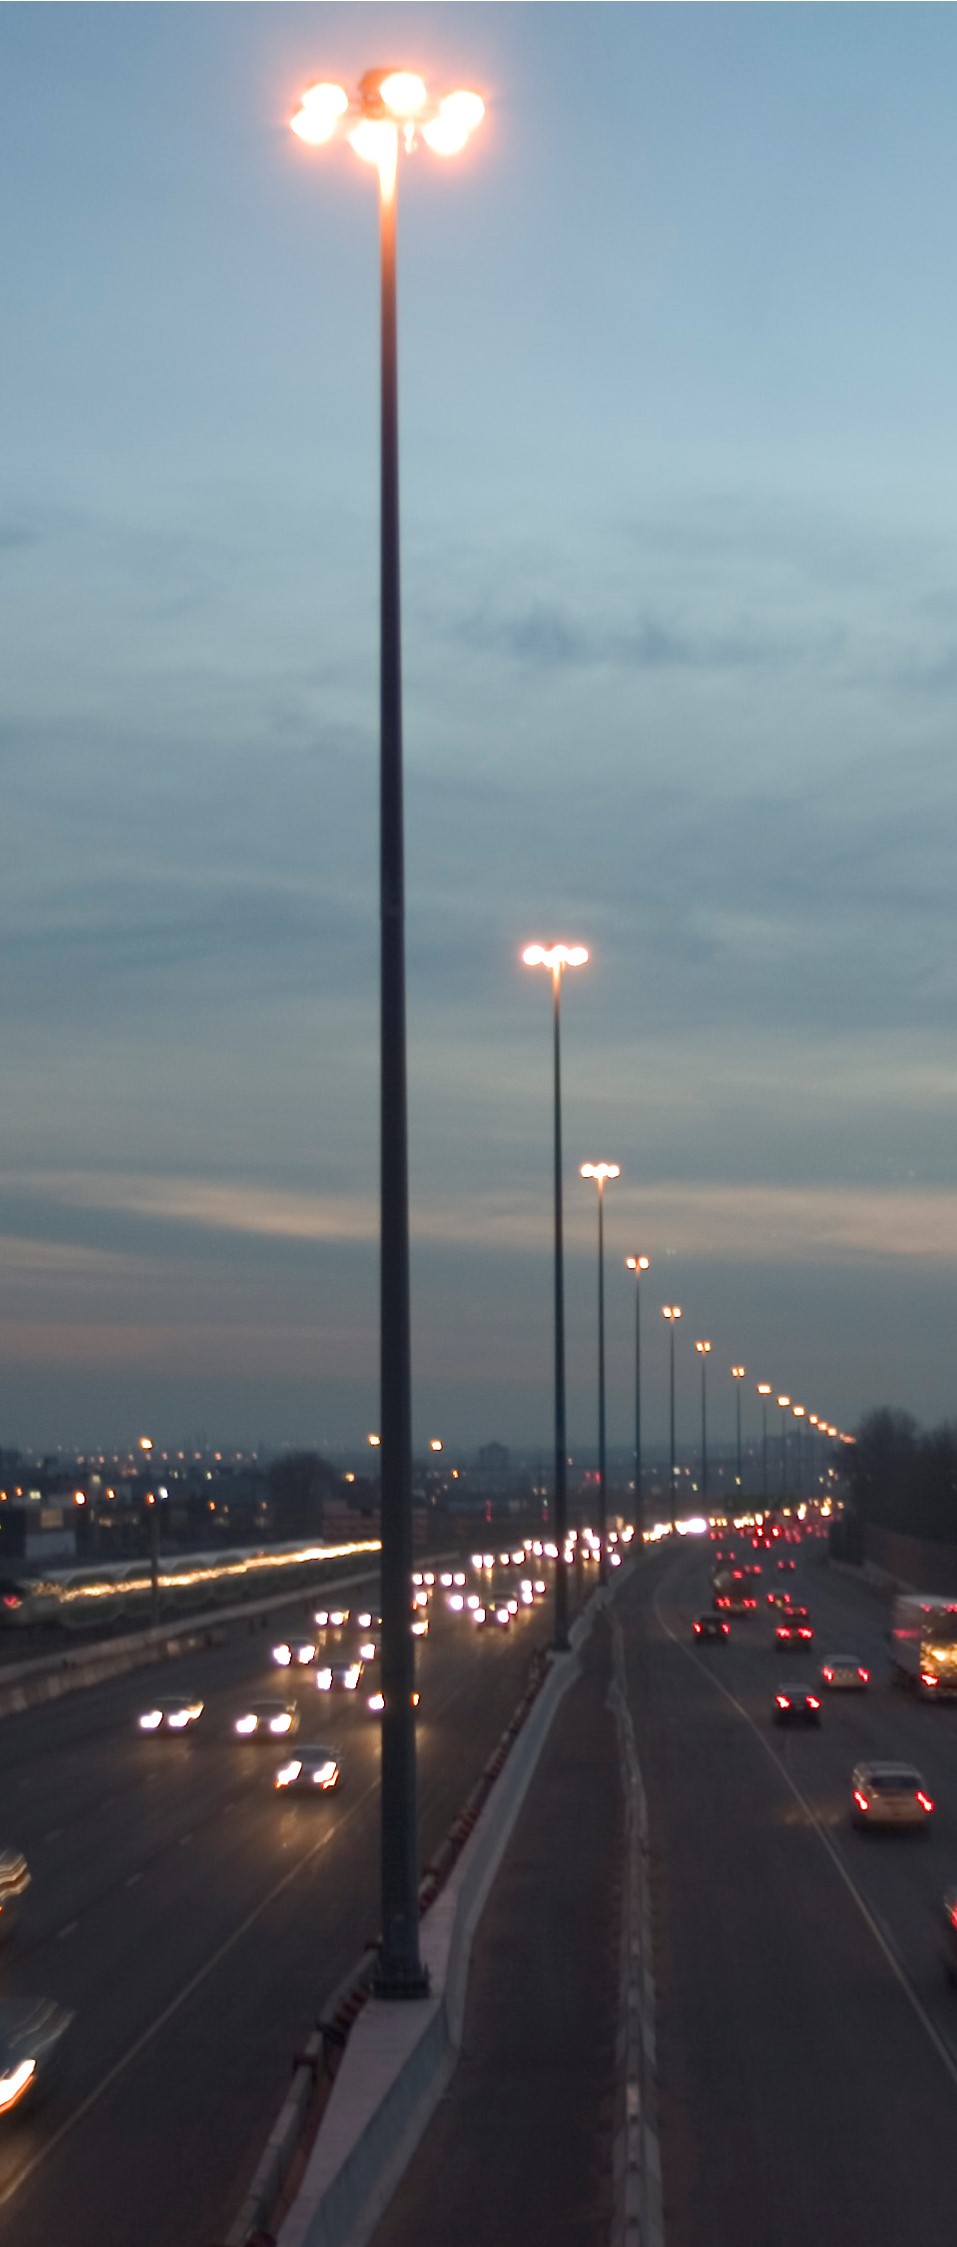 A photo that shows an example of illumination along the freeway during the night.